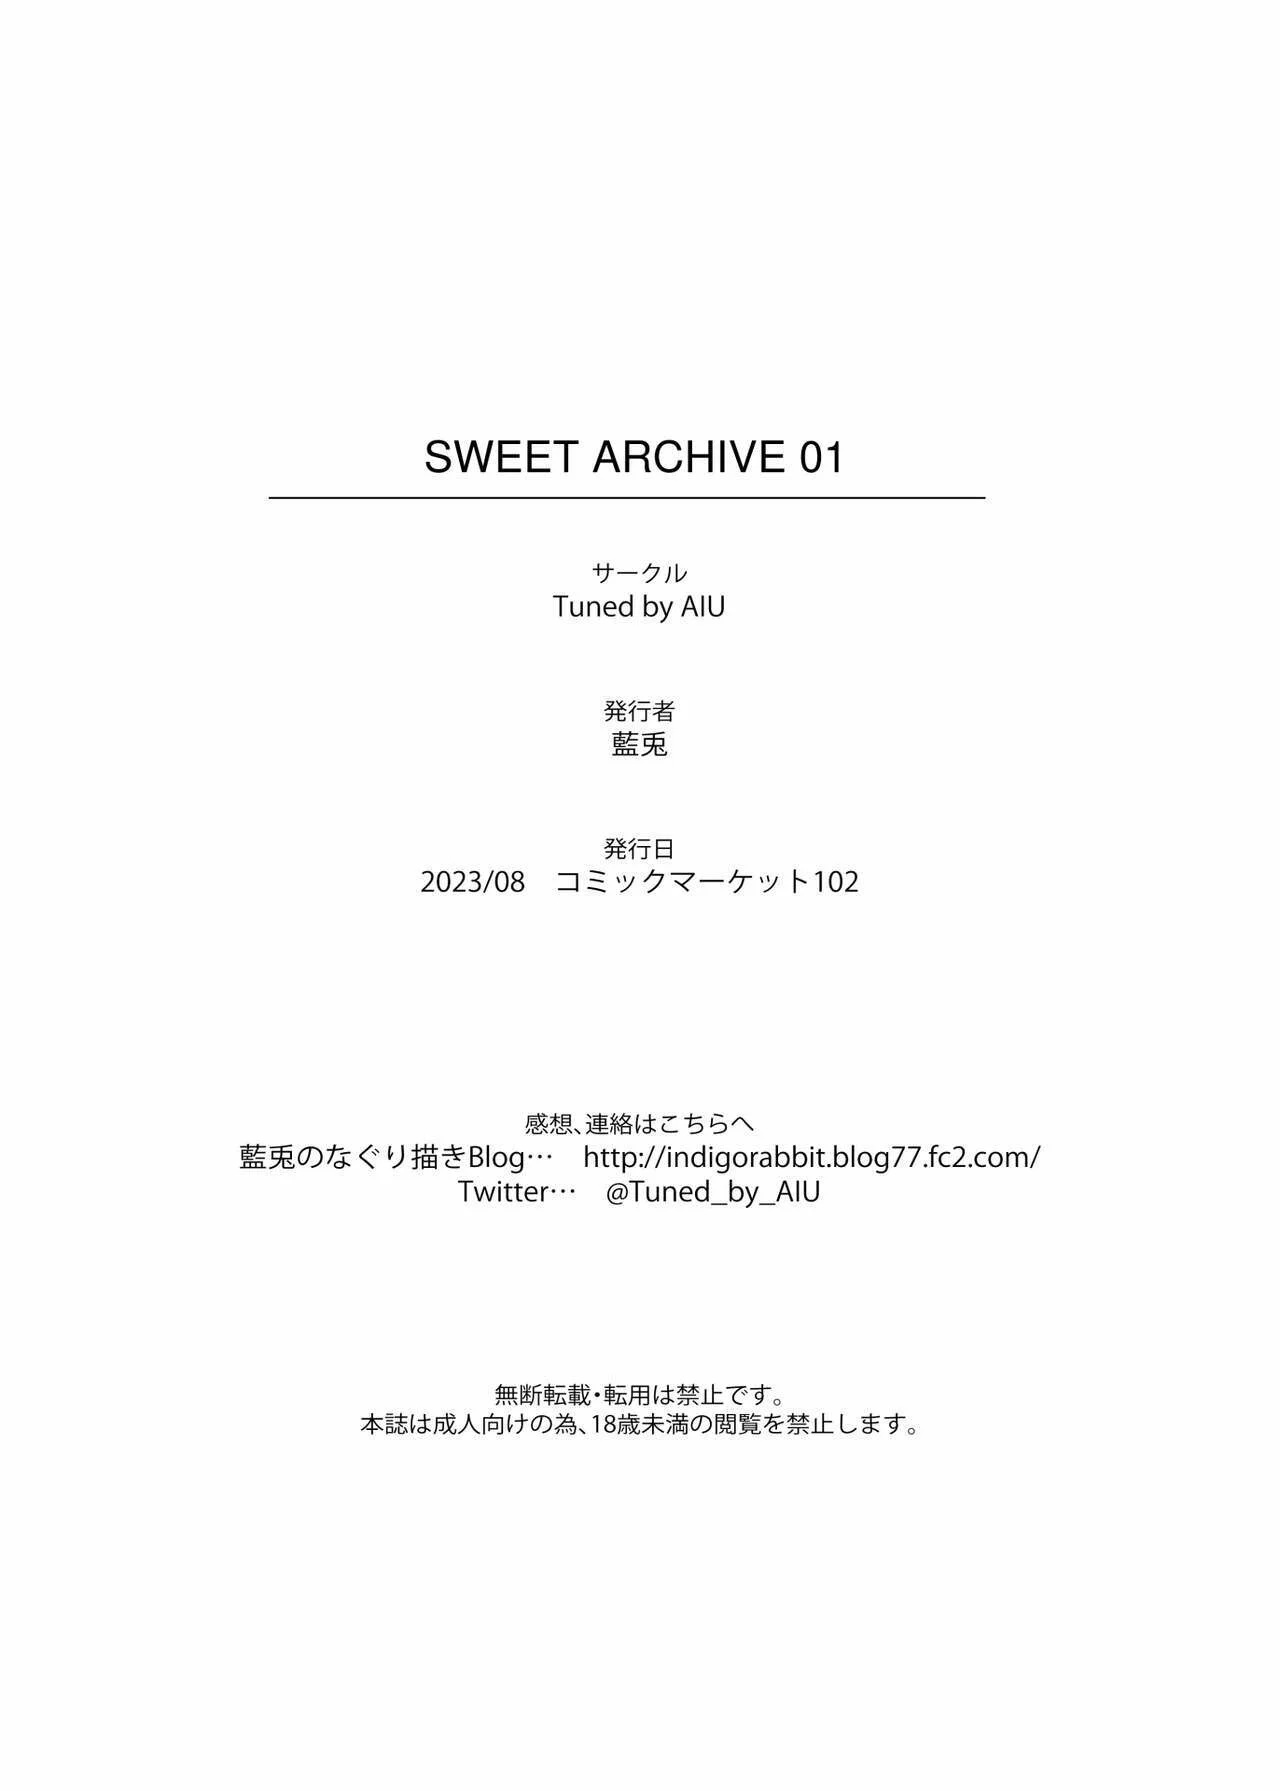 SWEET ARCHIVE 01 - 14